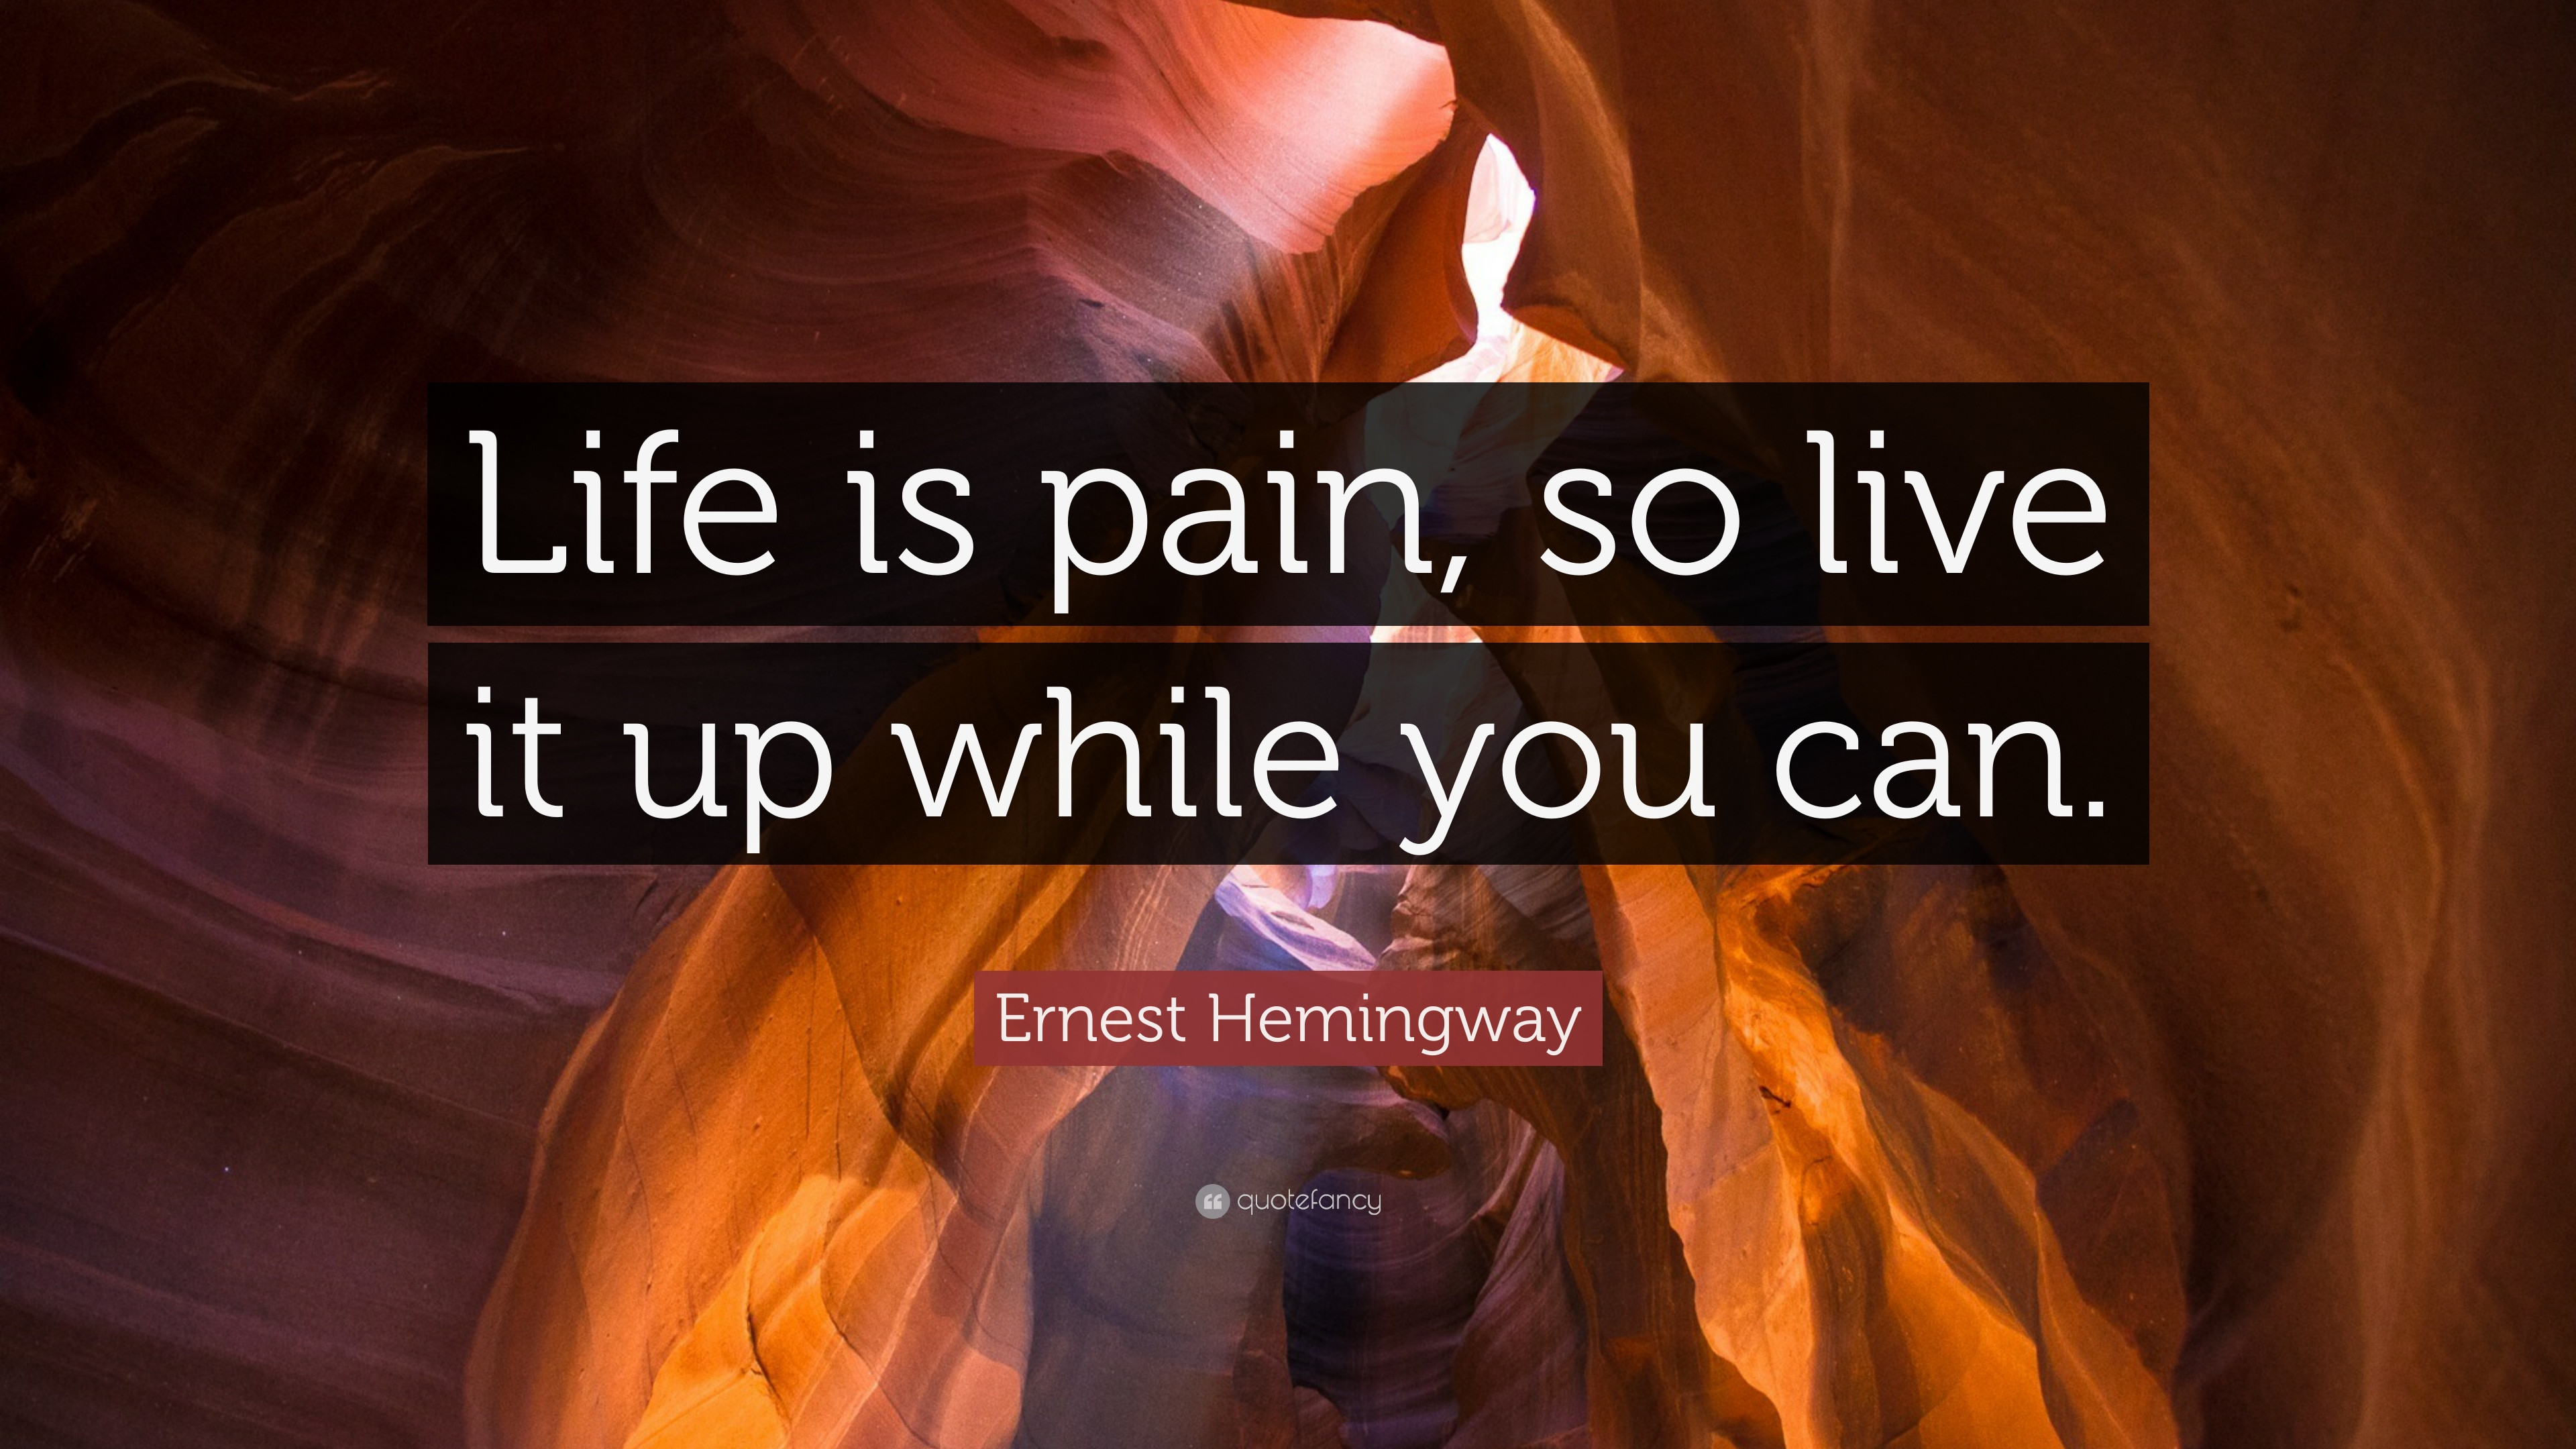 Life Is Pain Quote
 Ernest Hemingway Quote “Life is pain so live it up while